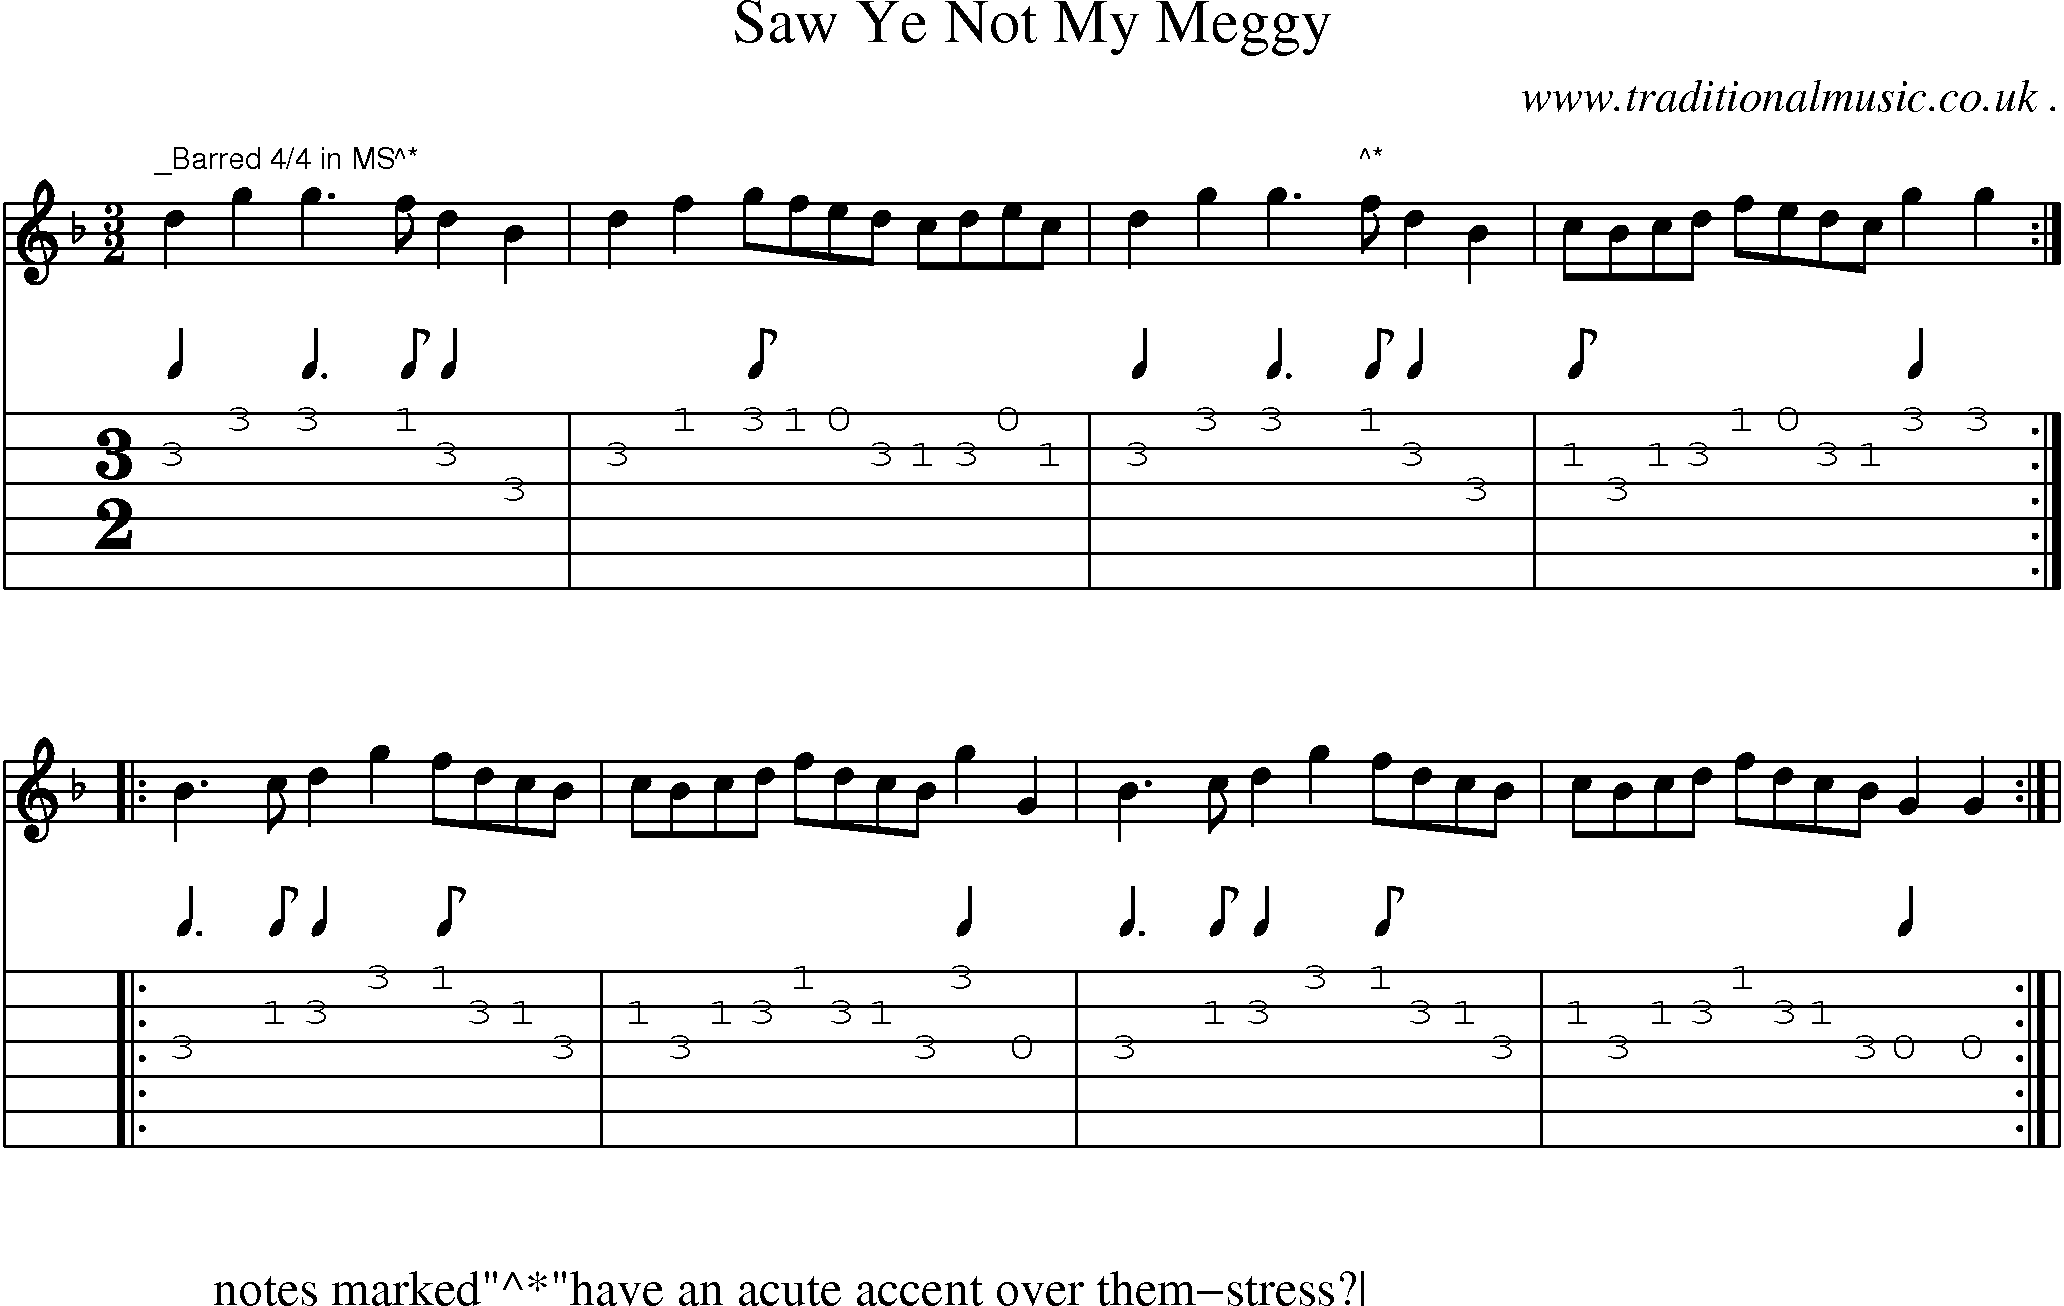 Sheet-Music and Guitar Tabs for Saw Ye Not My Meggy